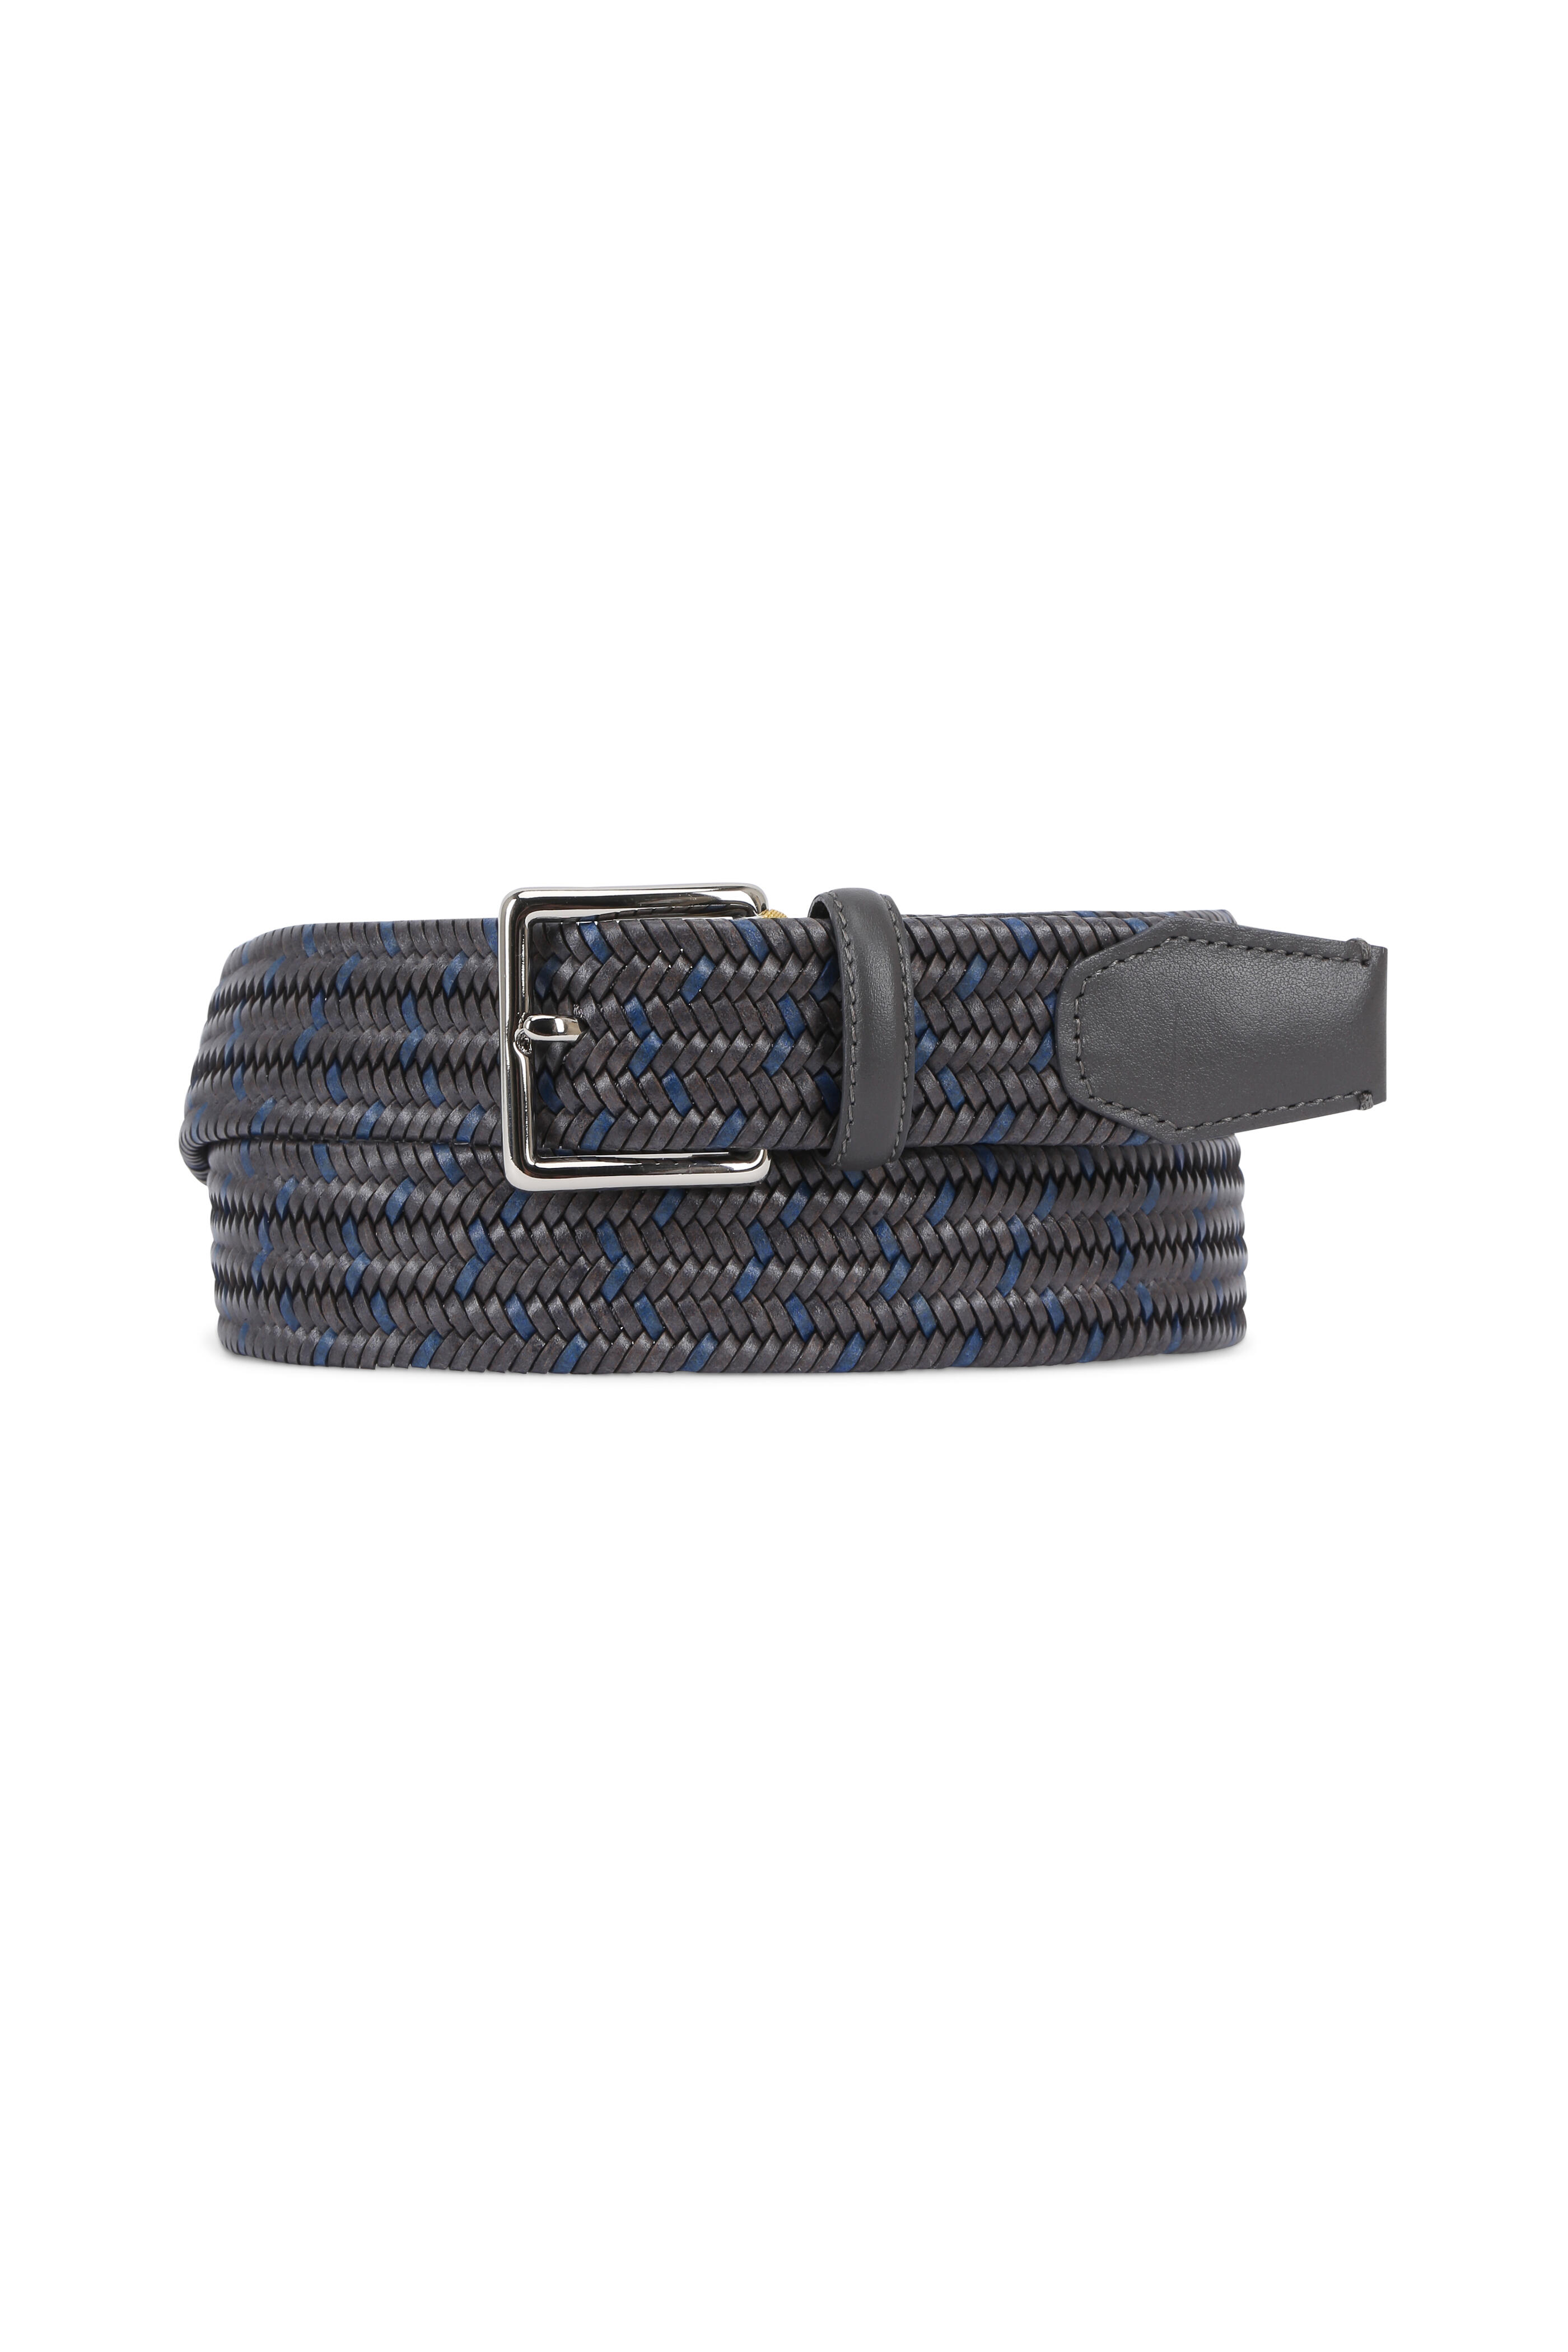 Italian Woven Leather Stretch Belt by Torino Leather - Black